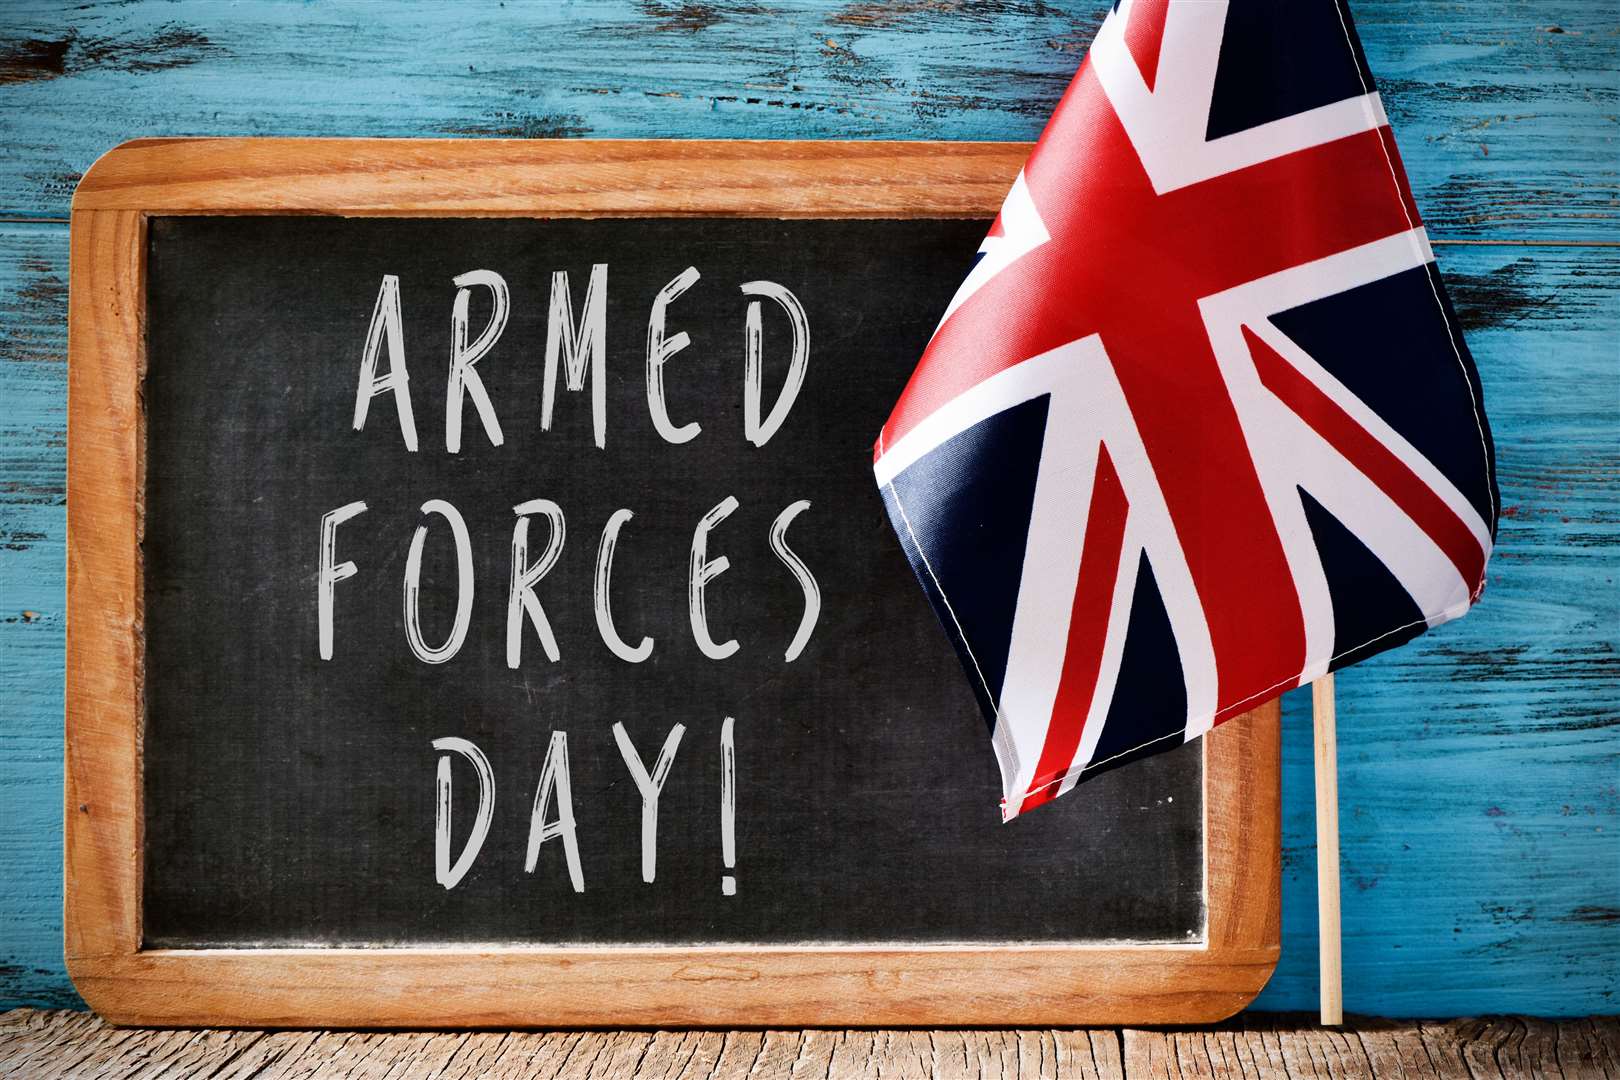 Armed Forces Day 2023 is on Saturday, June 24/